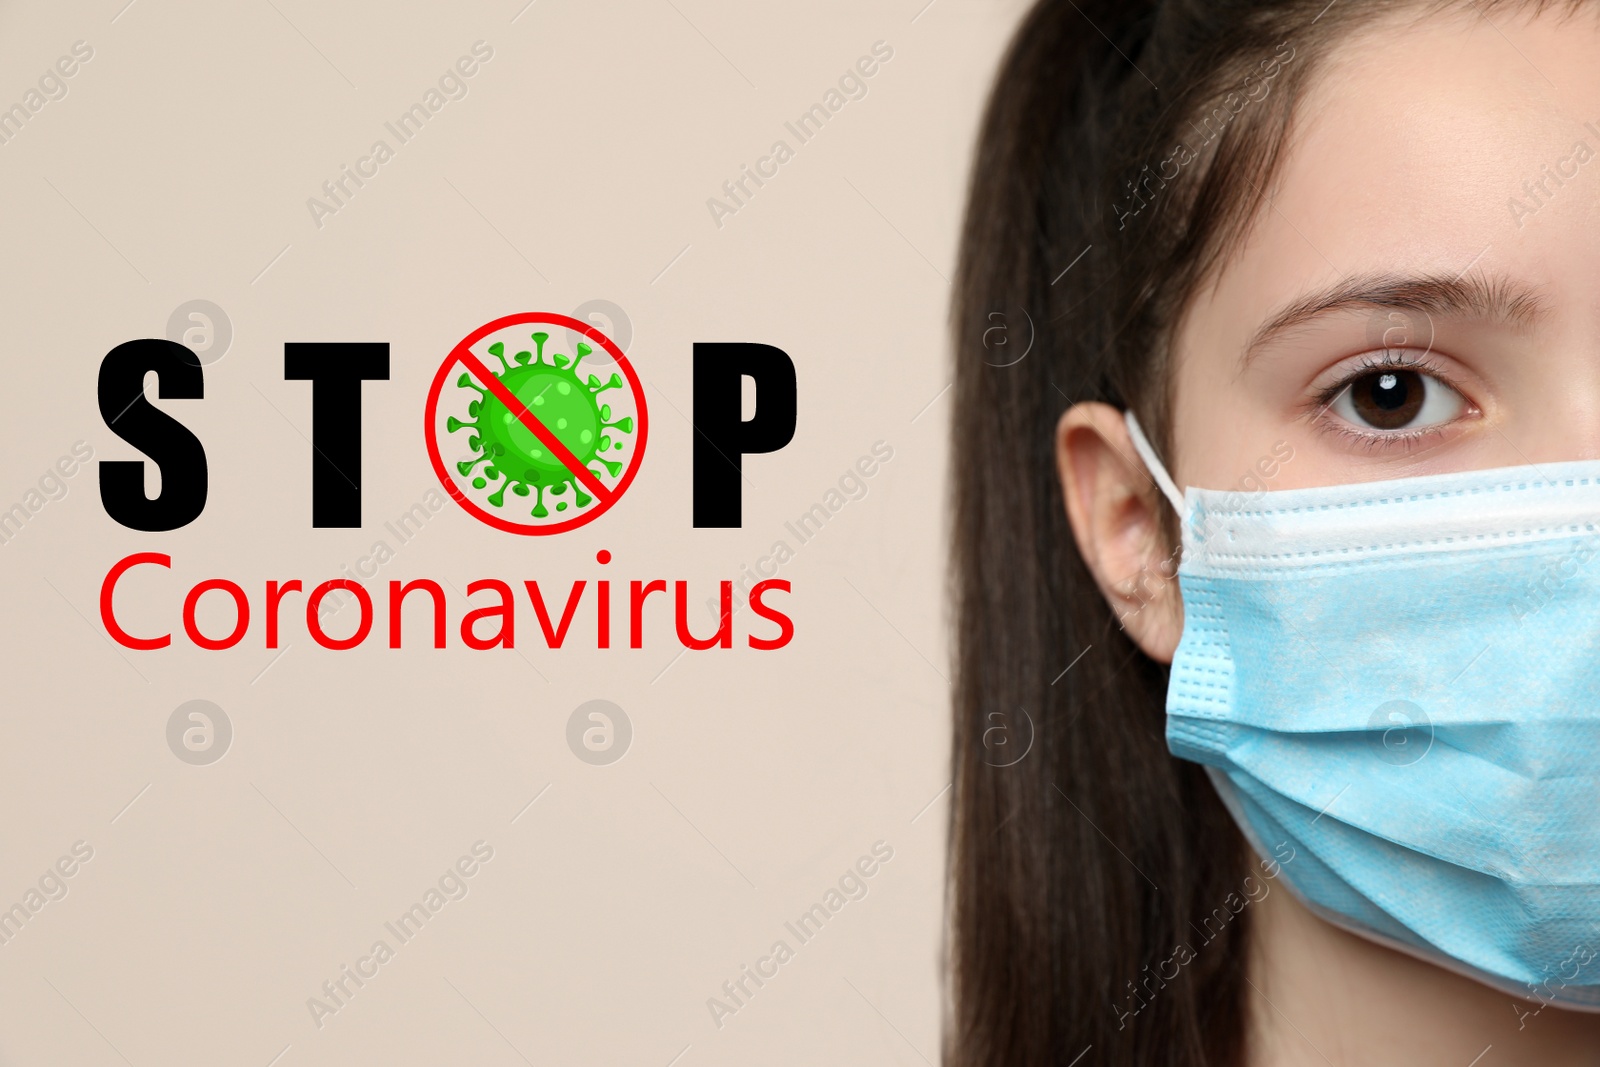 Image of Stop Coronavirus text near little girl wearing medical mask on beige background, closeup. Protective measures during pandemic